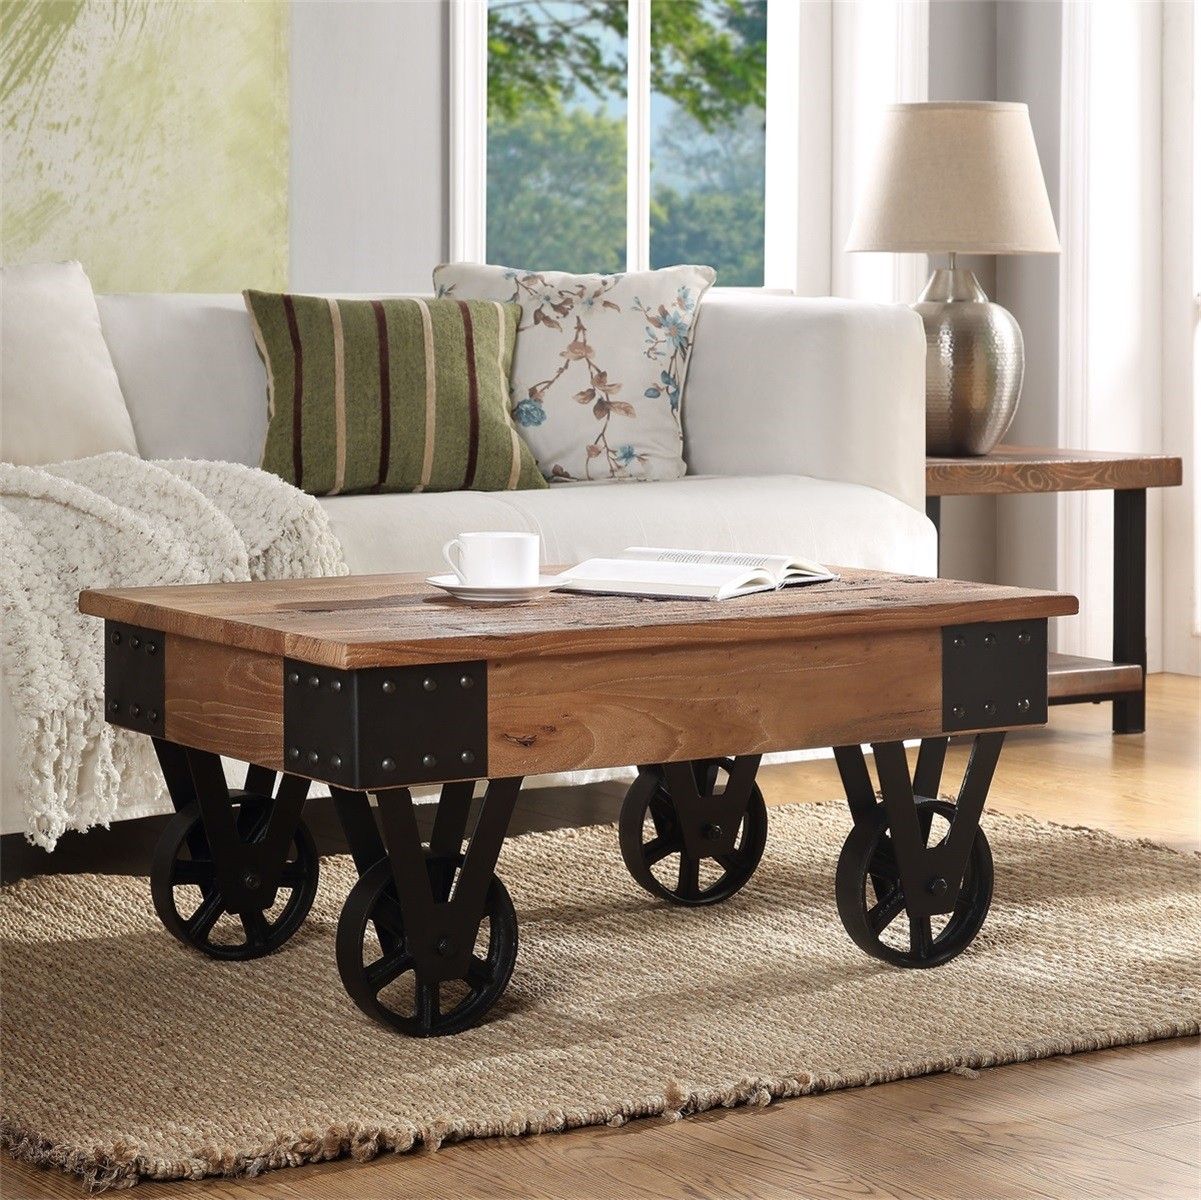 Modernluxe Farmhouse Vintage Mobile Coffee Table – Walmart In Antique White Black Coffee Tables (Photo 13 of 15)